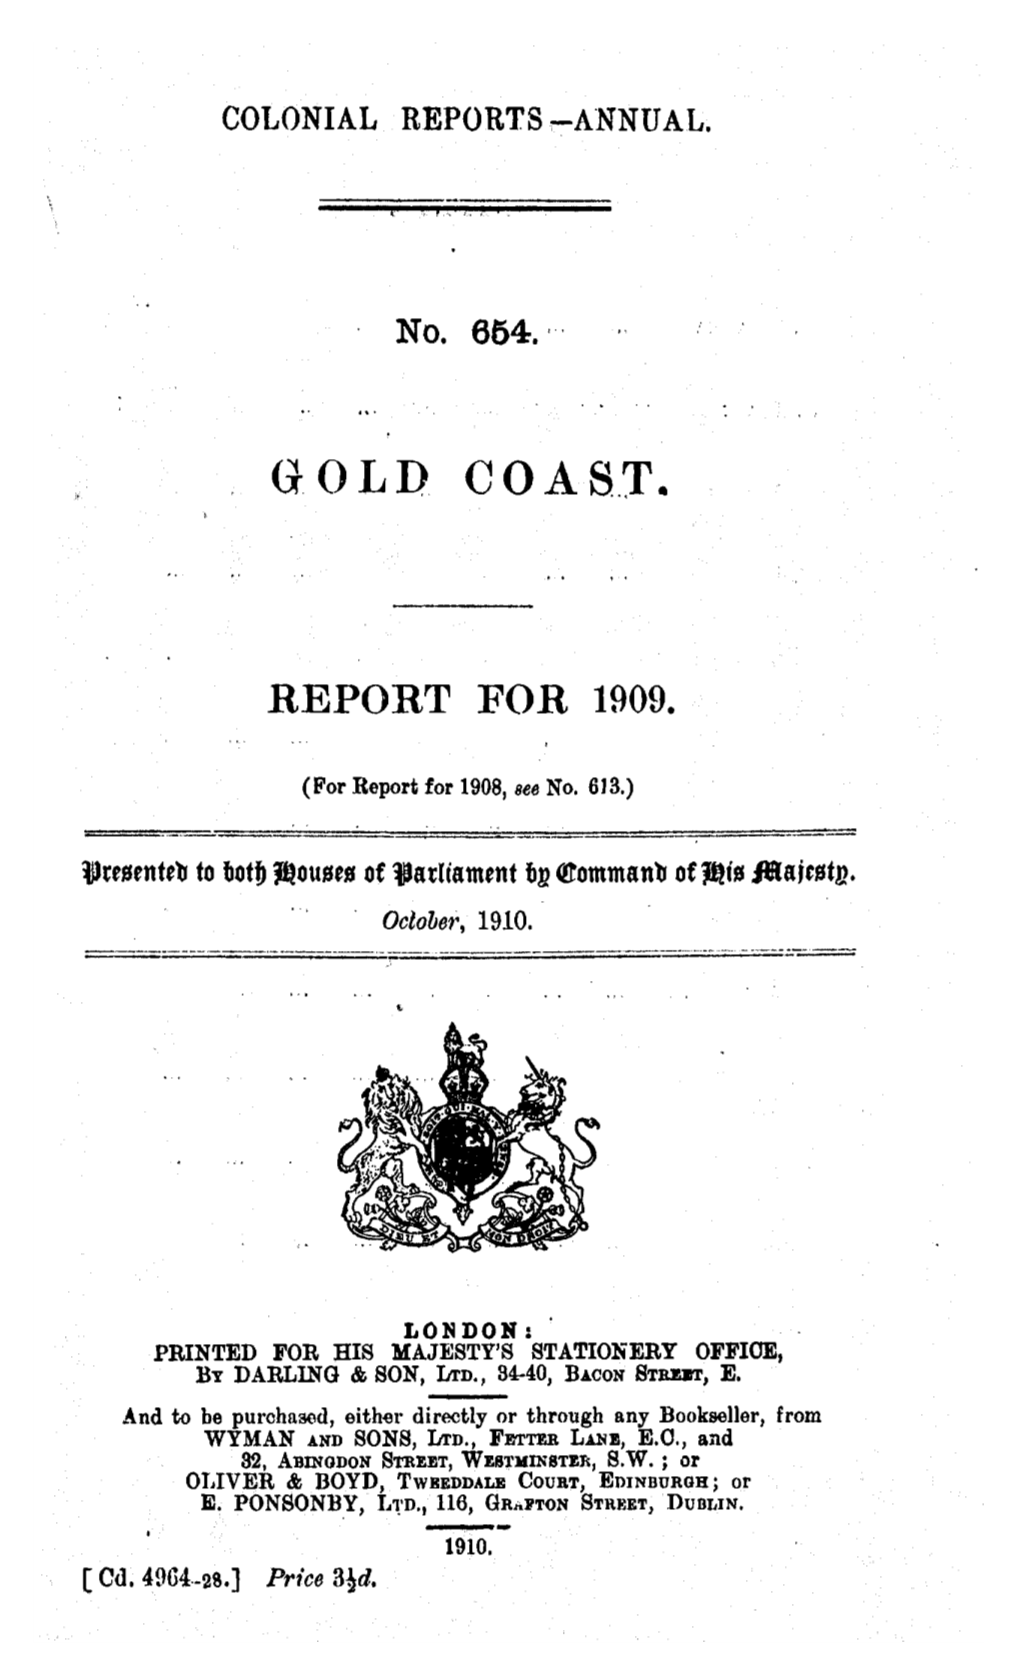 Annual Report of the Colonies, Gold Coast, 1909